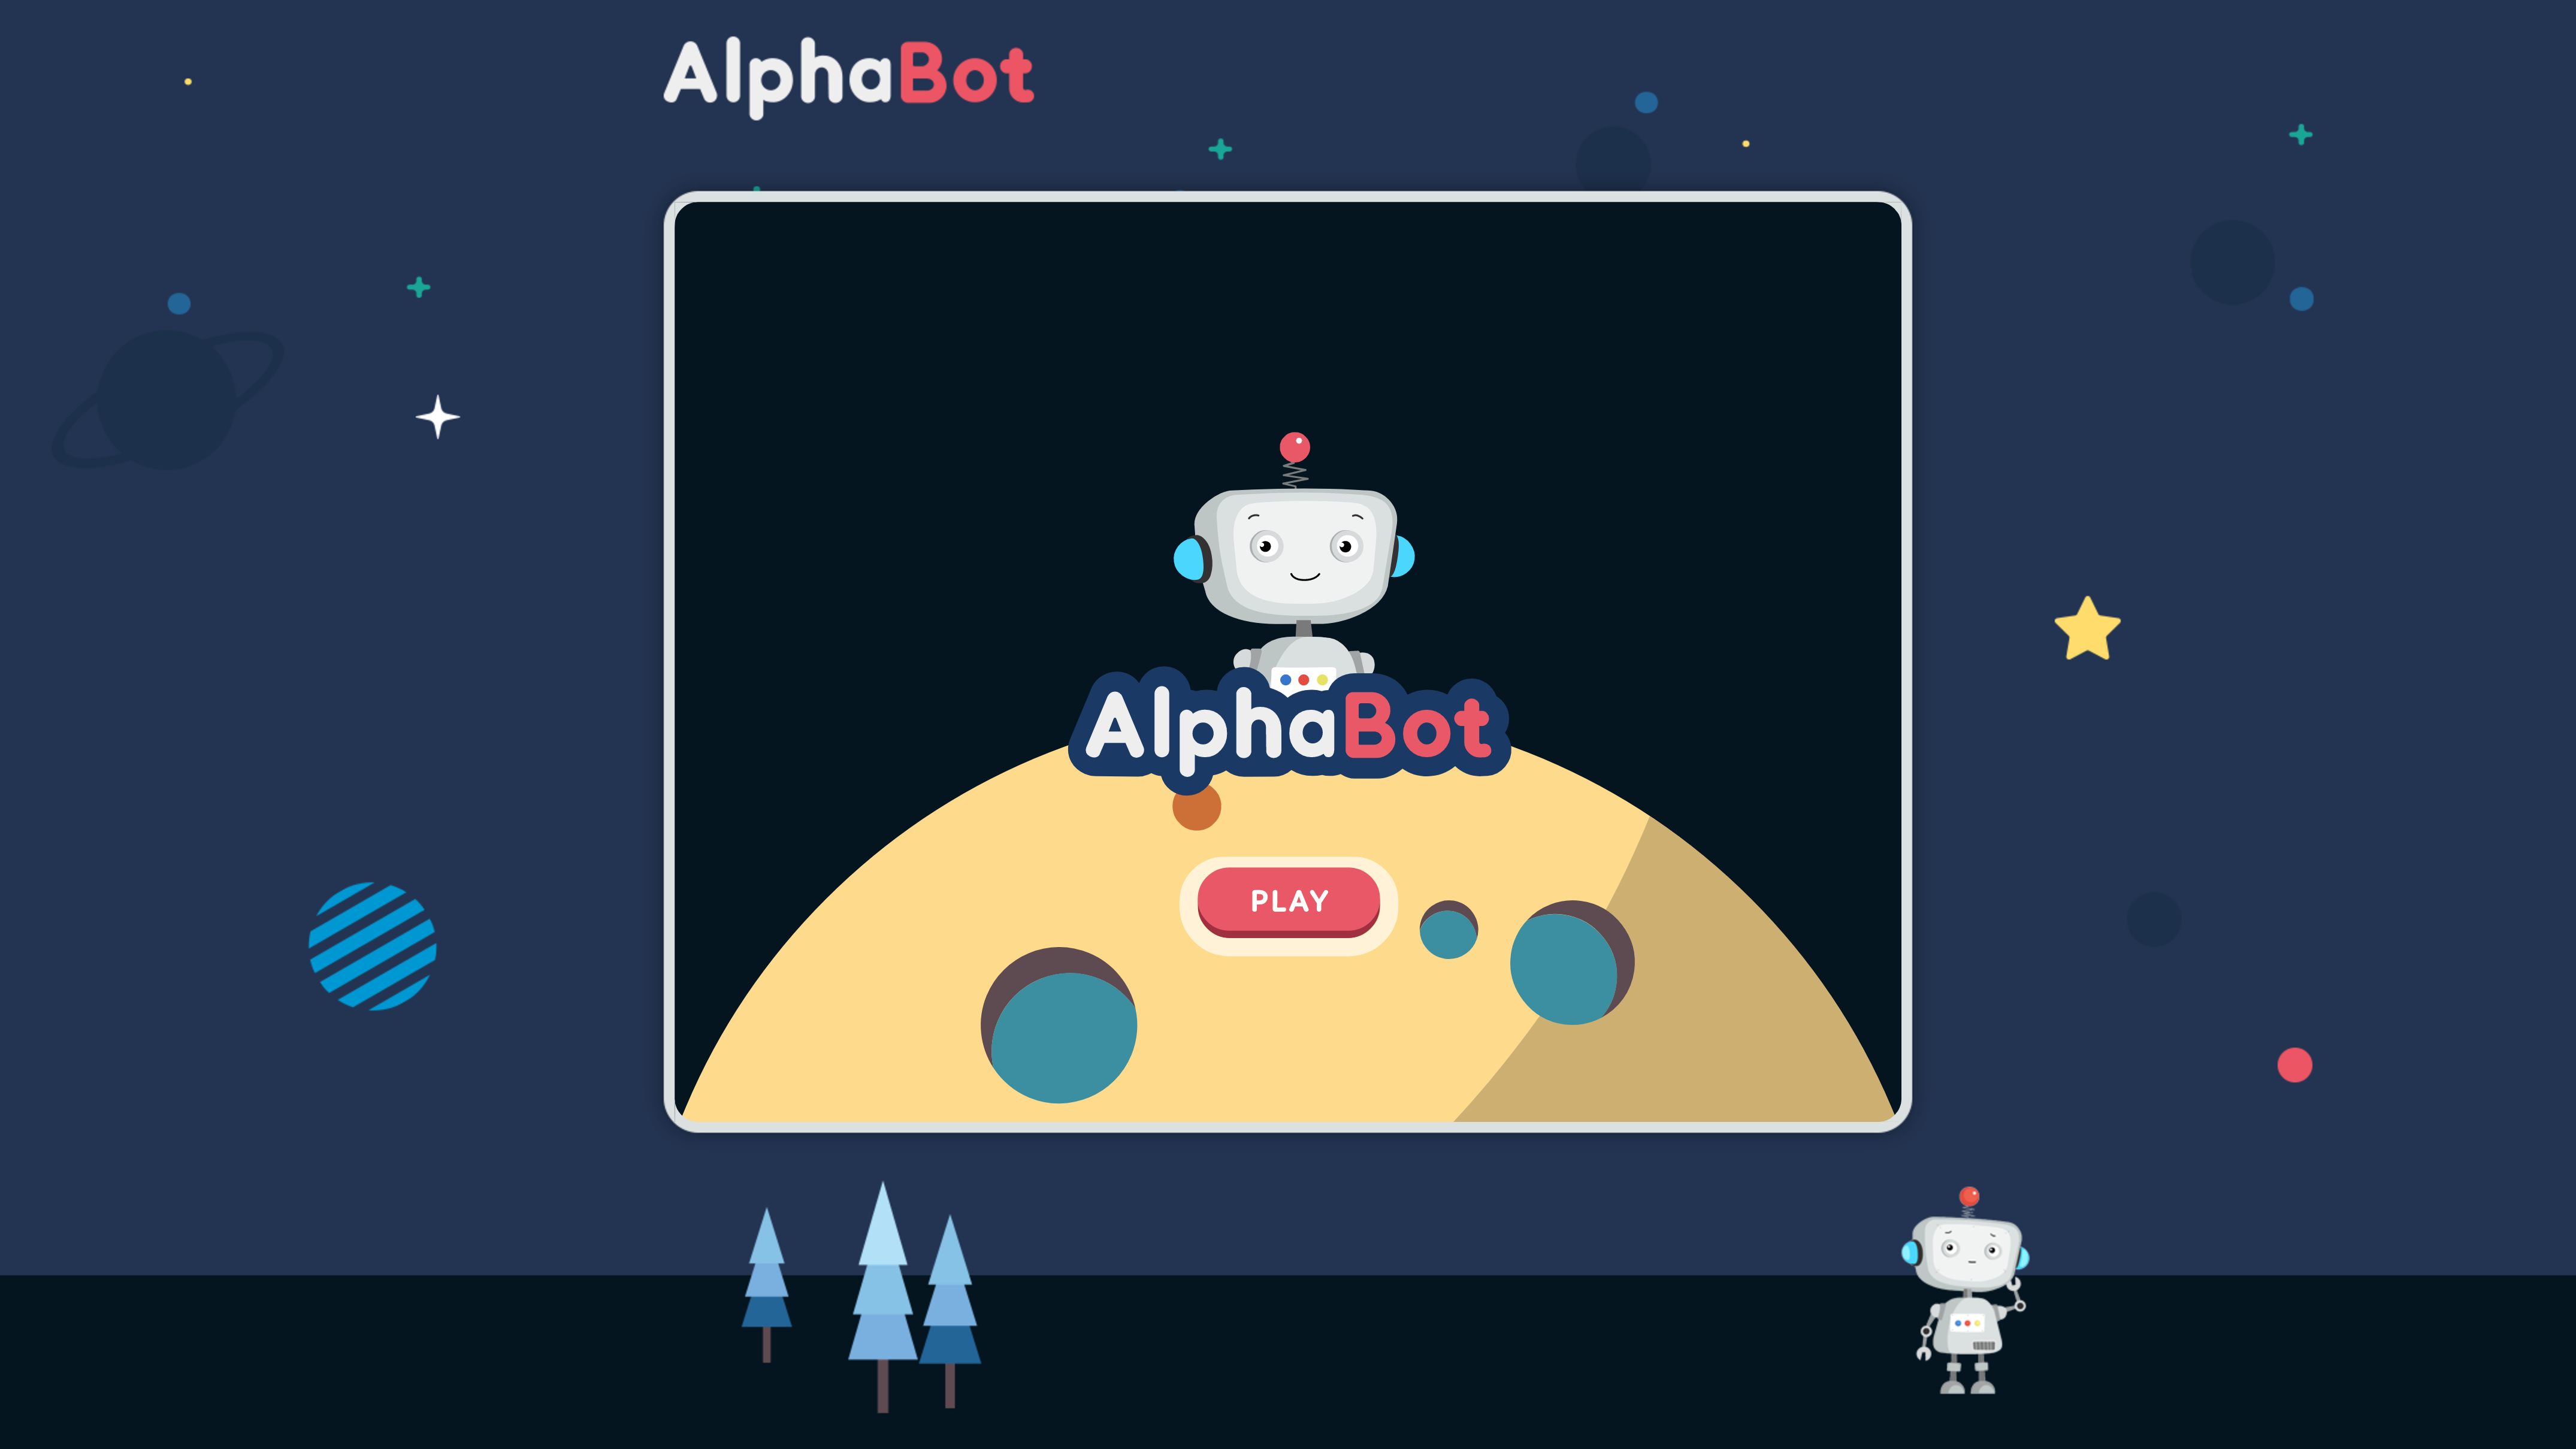 An AlphaBot standing on the moon and ready for the game to start.